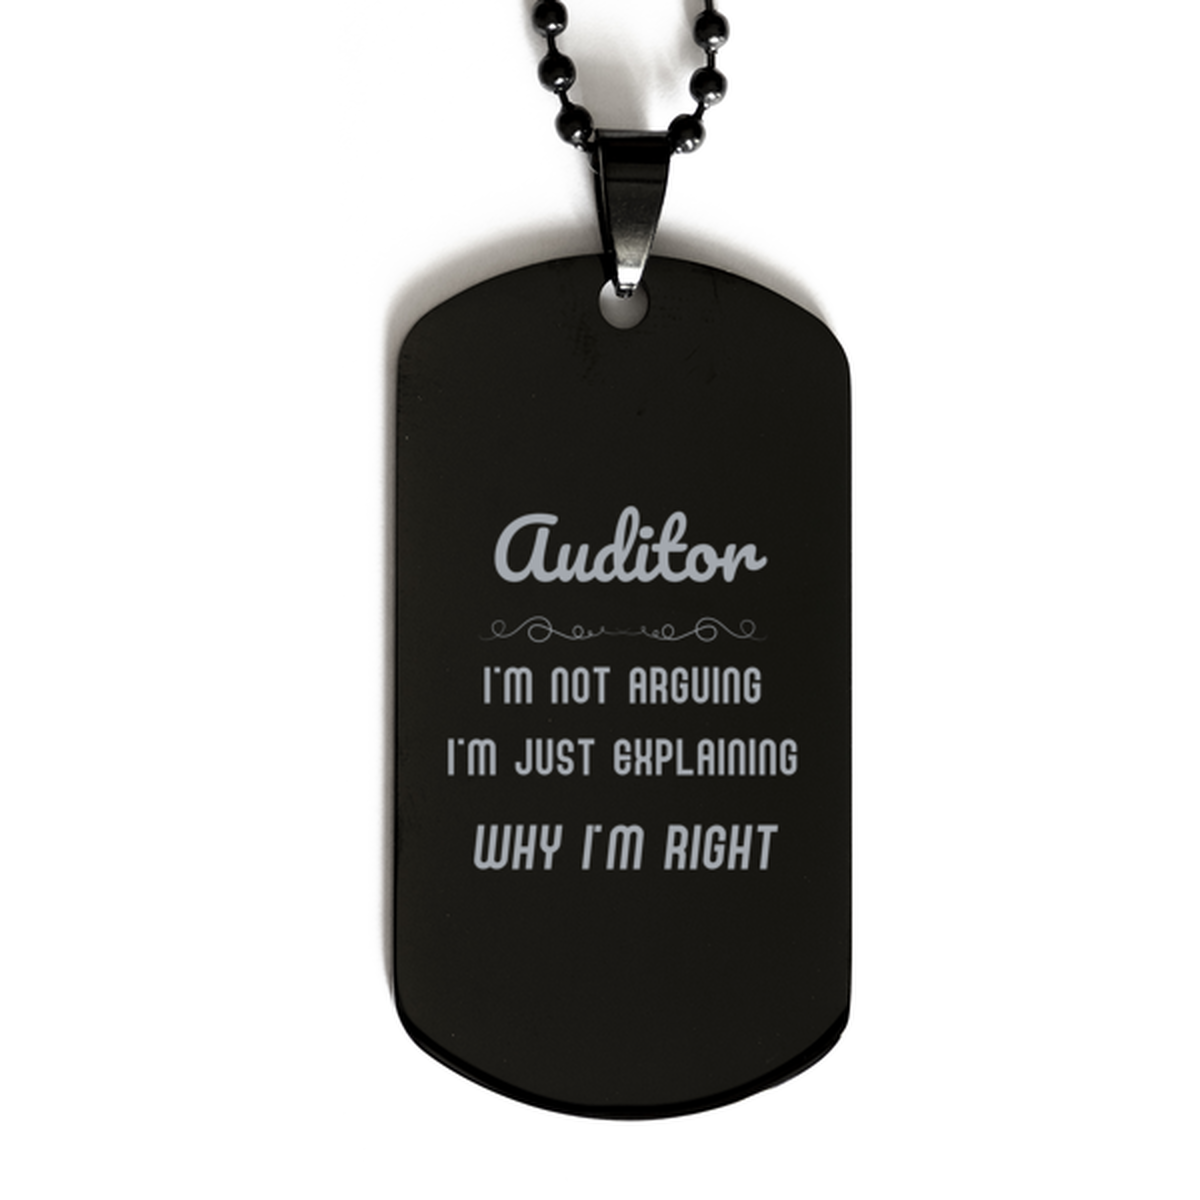 Auditor I'm not Arguing. I'm Just Explaining Why I'm RIGHT Black Dog Tag, Funny Saying Quote Auditor Gifts For Auditor Graduation Birthday Christmas Gifts for Men Women Coworker